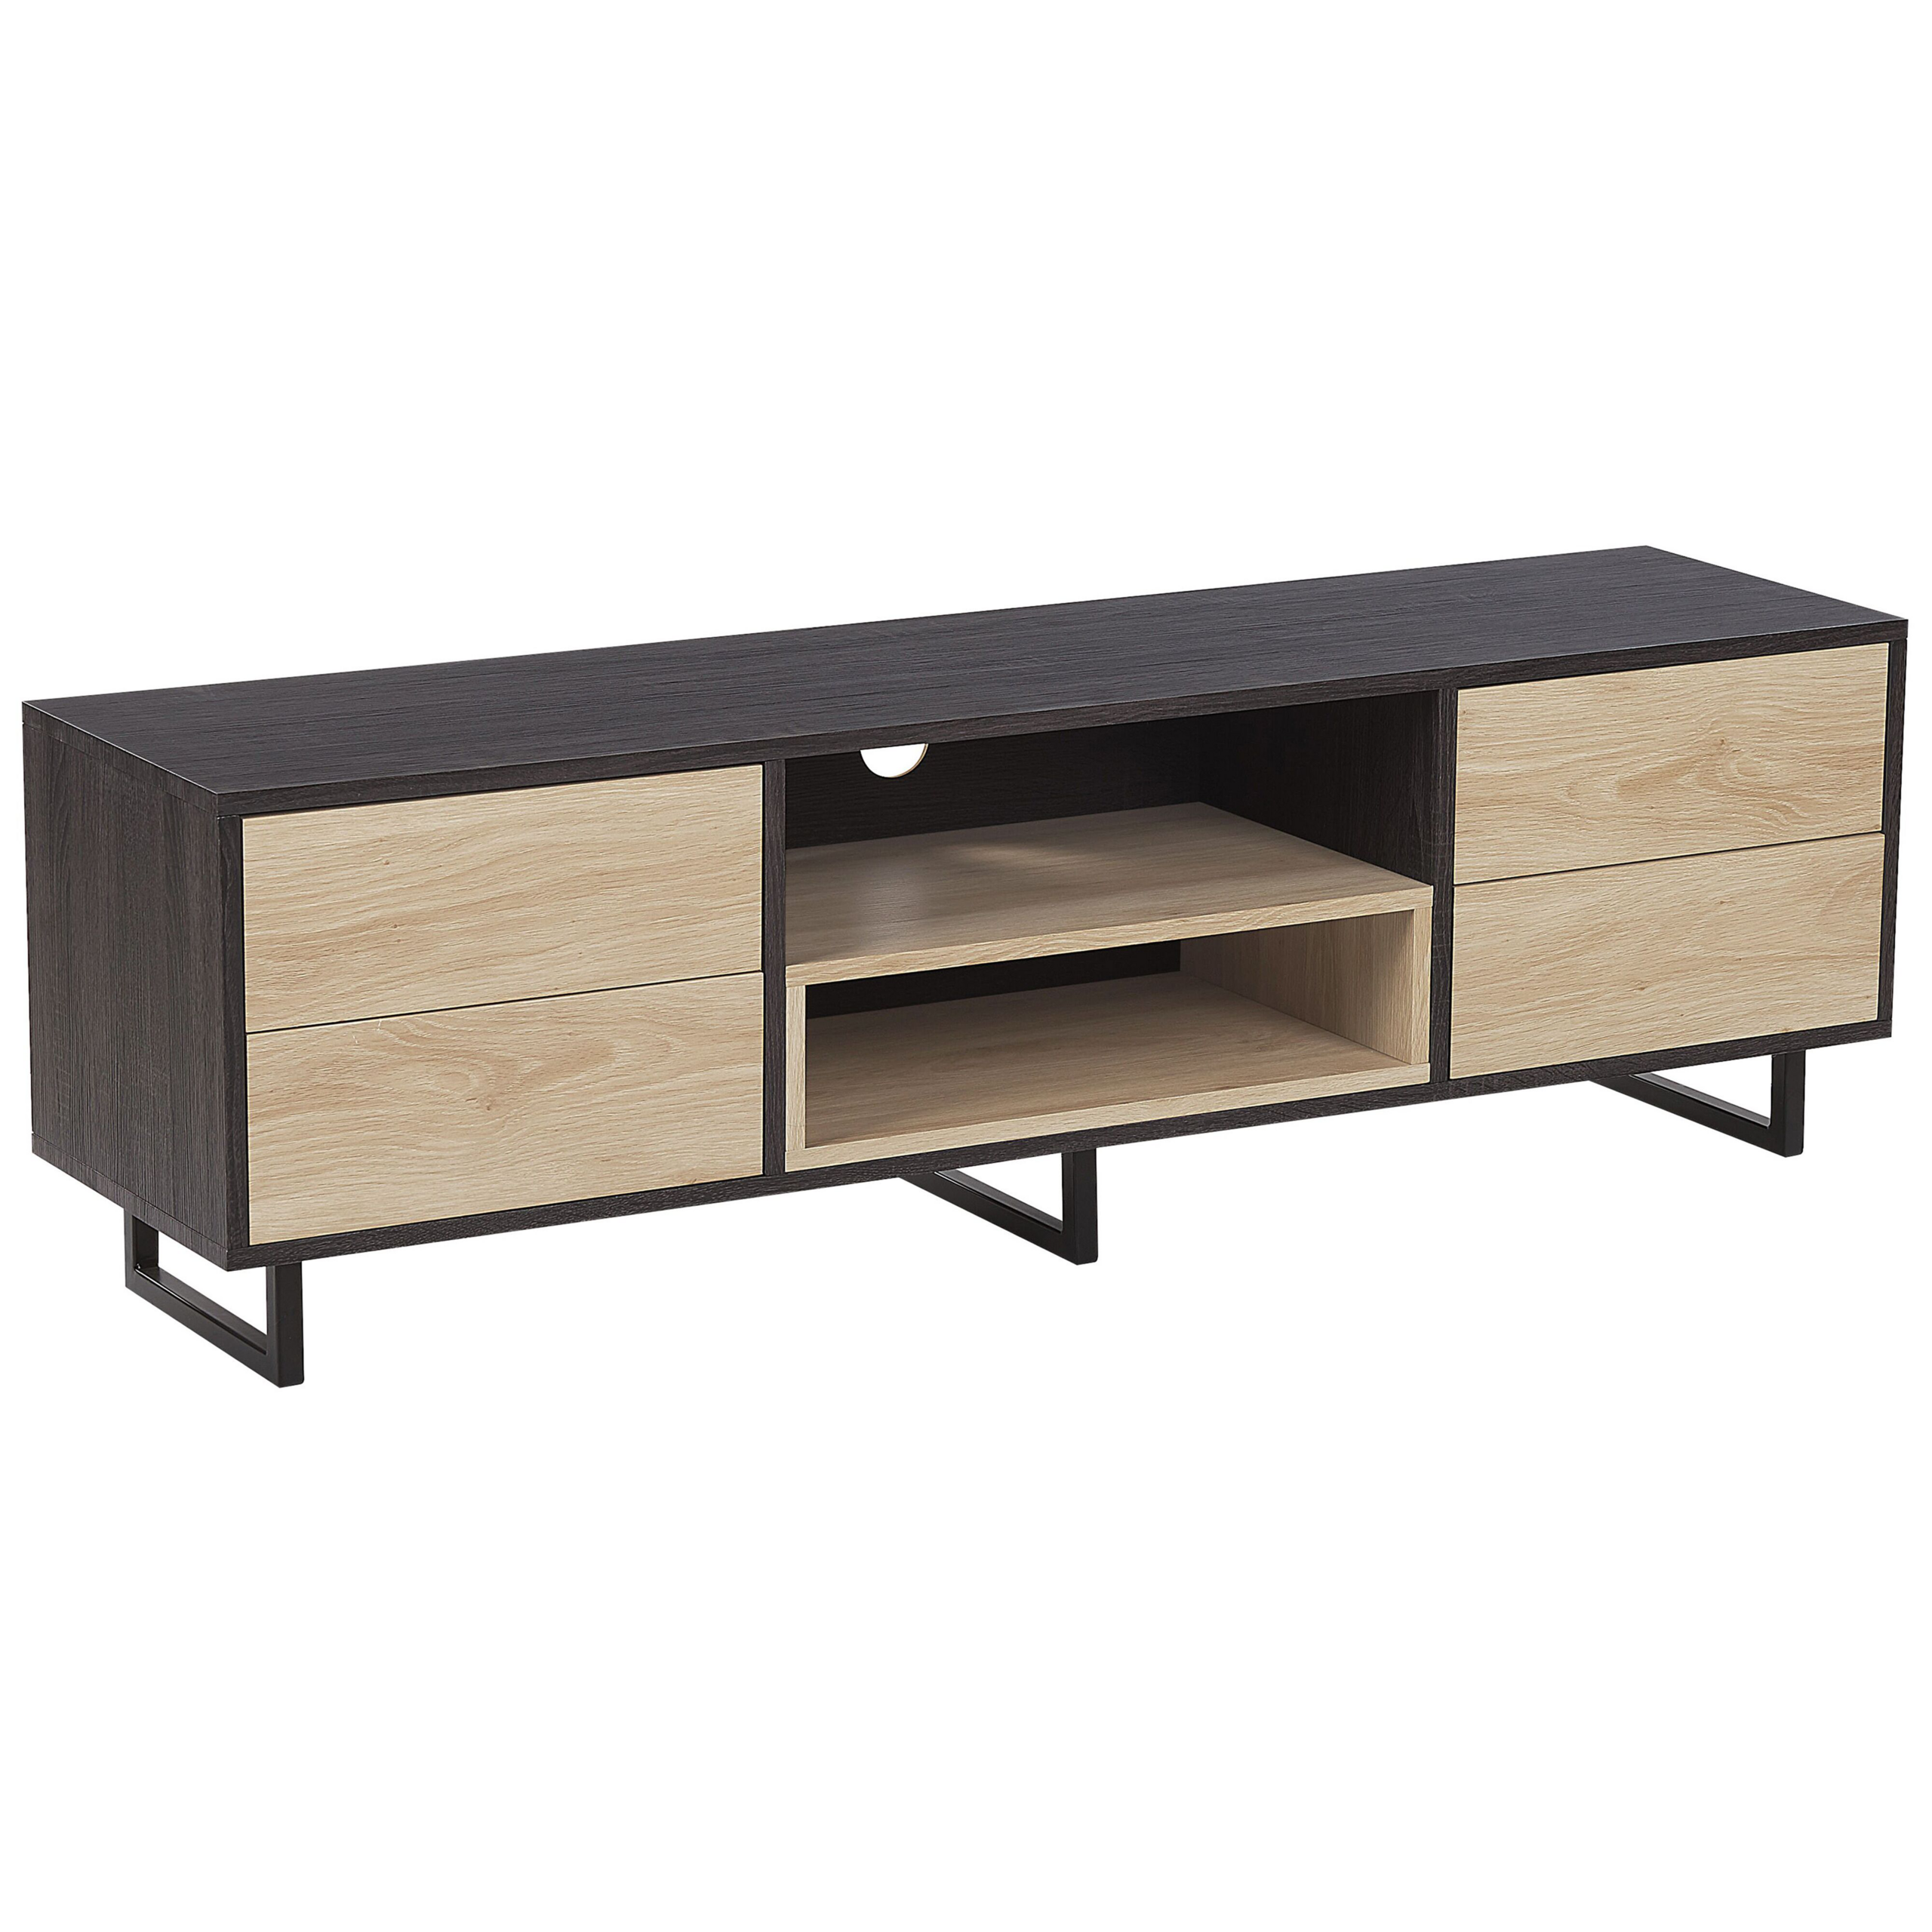 Beliani TV Cabinet Dark and Light Wood TV up to 65ʺ Storage Shelves Drawers Cable Management